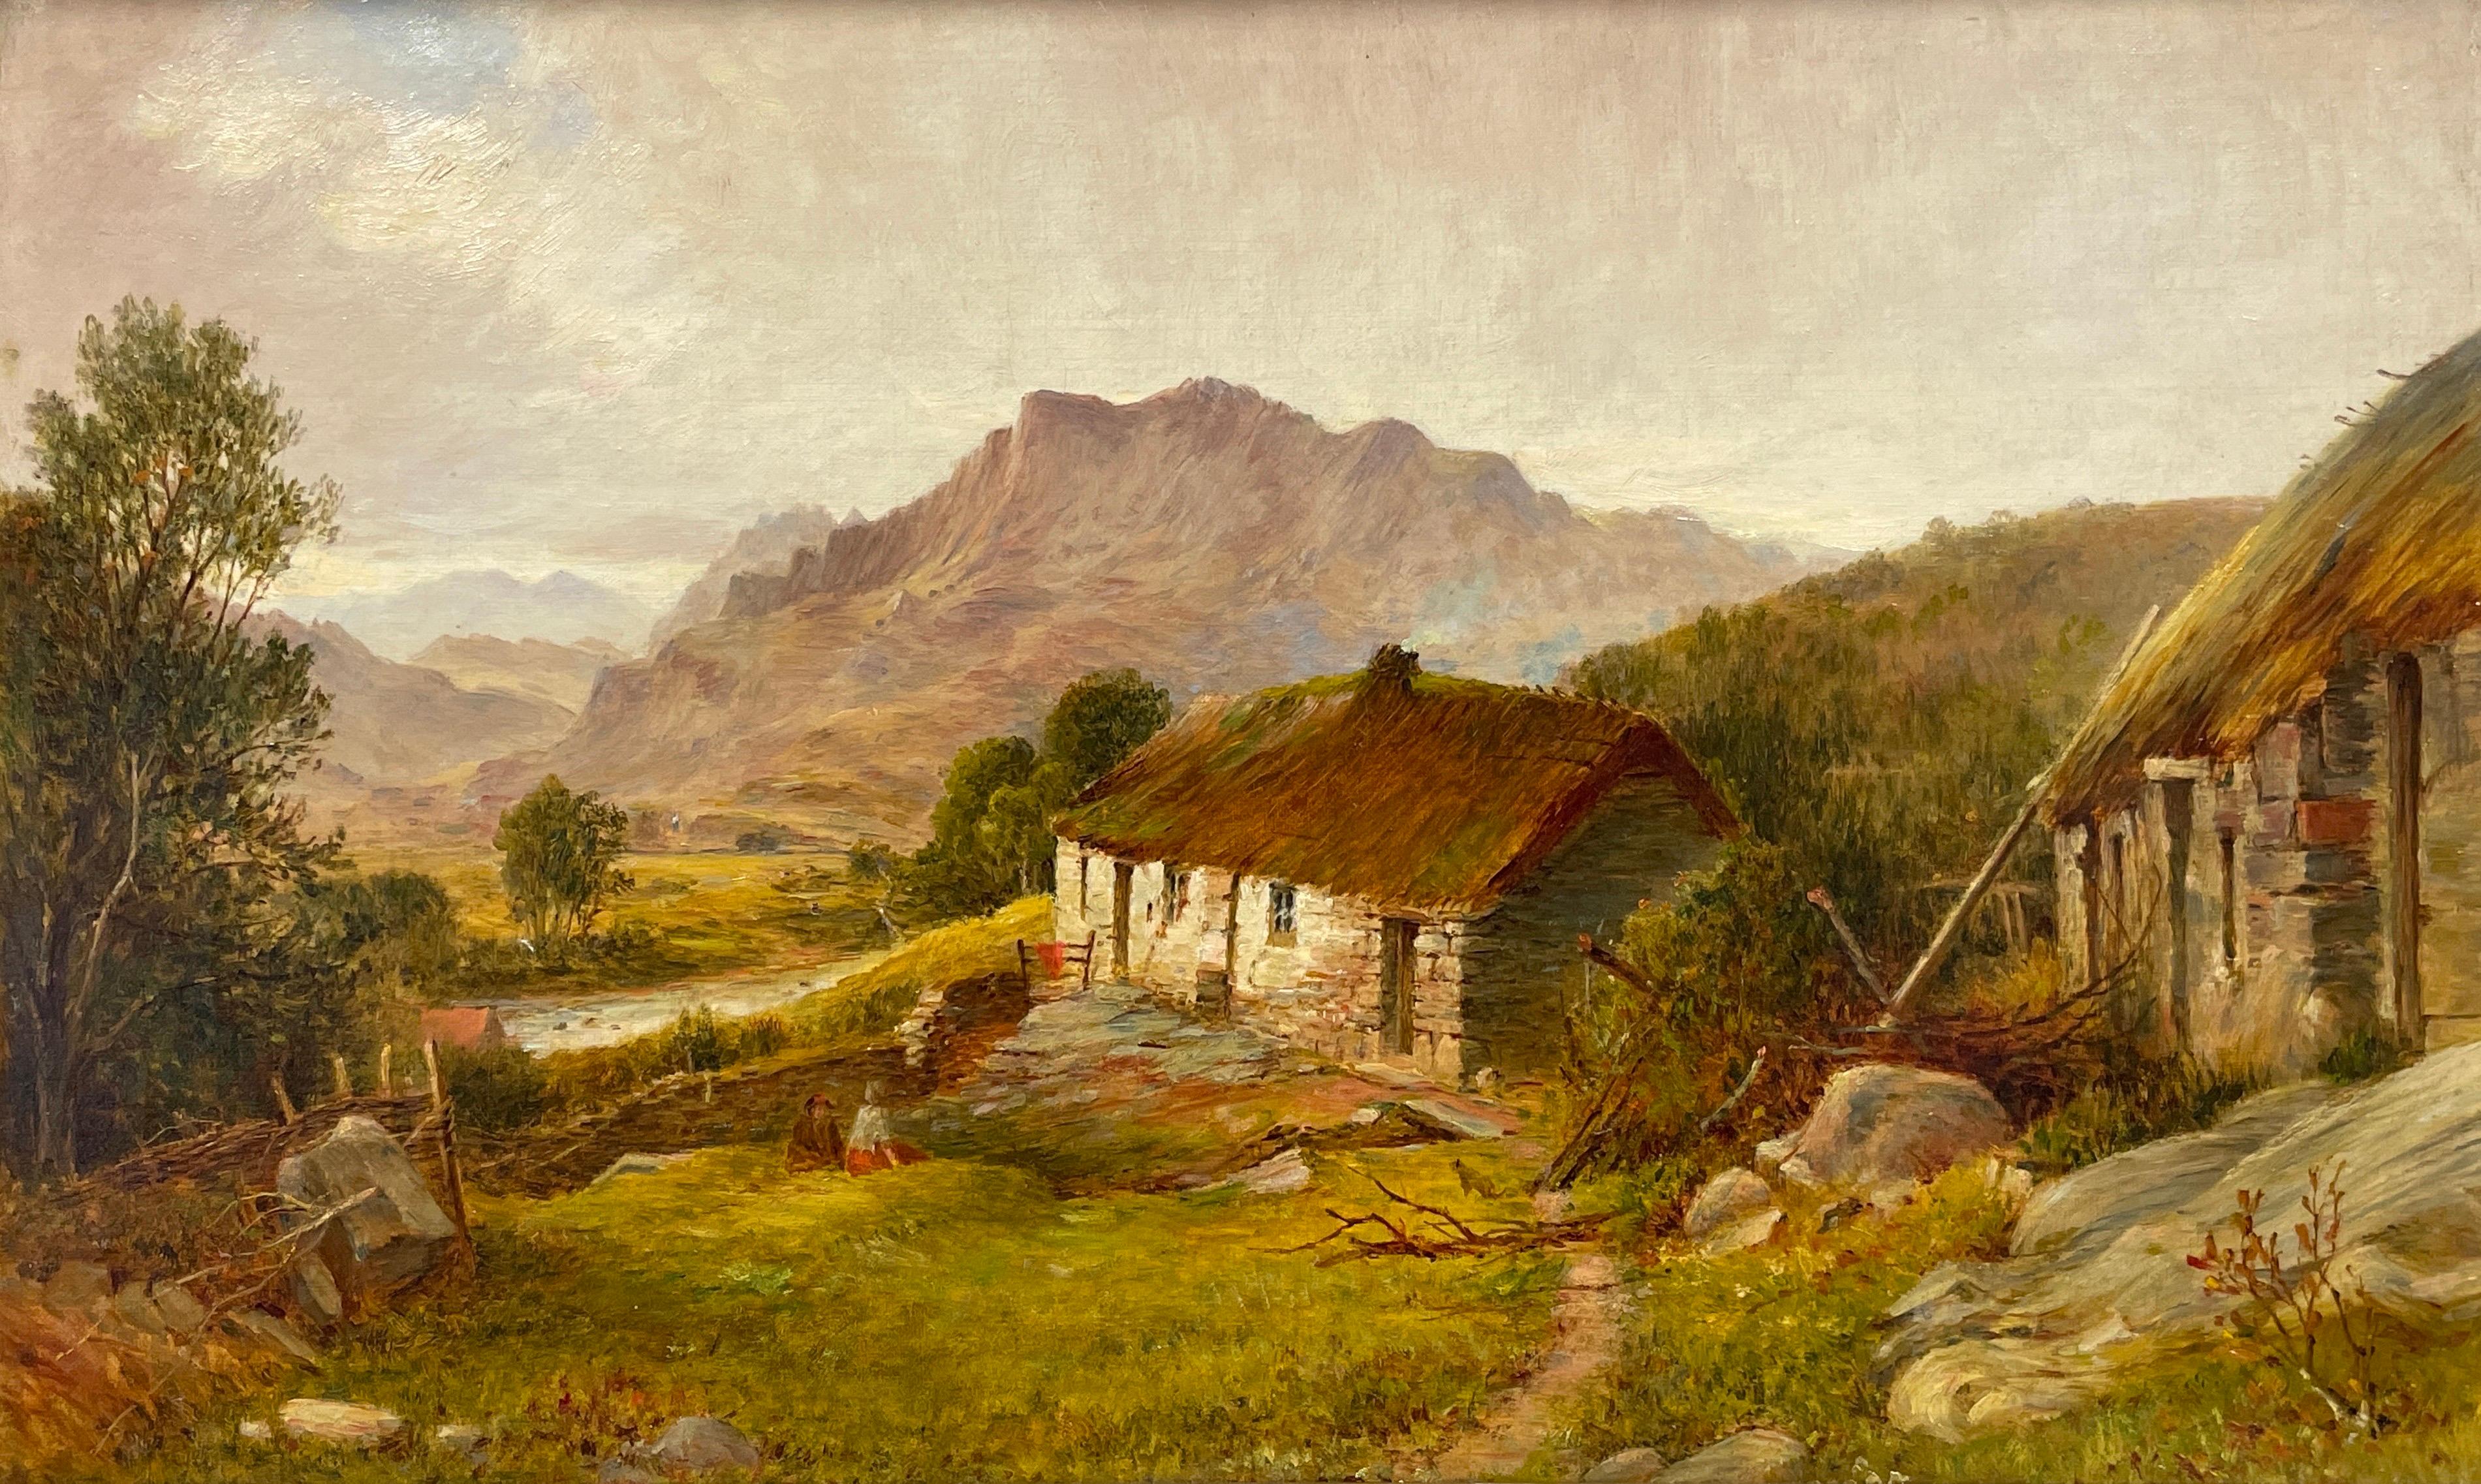 The Highland Croft
Scottish School, 19th century
oil painting on canvas, framed
canvas: 16 x 24 inches
framed 19 x 29 inches
condition: very good indeed
provenance: from a private collection in the Scottish Highlands

A lovely 19th century Scottish